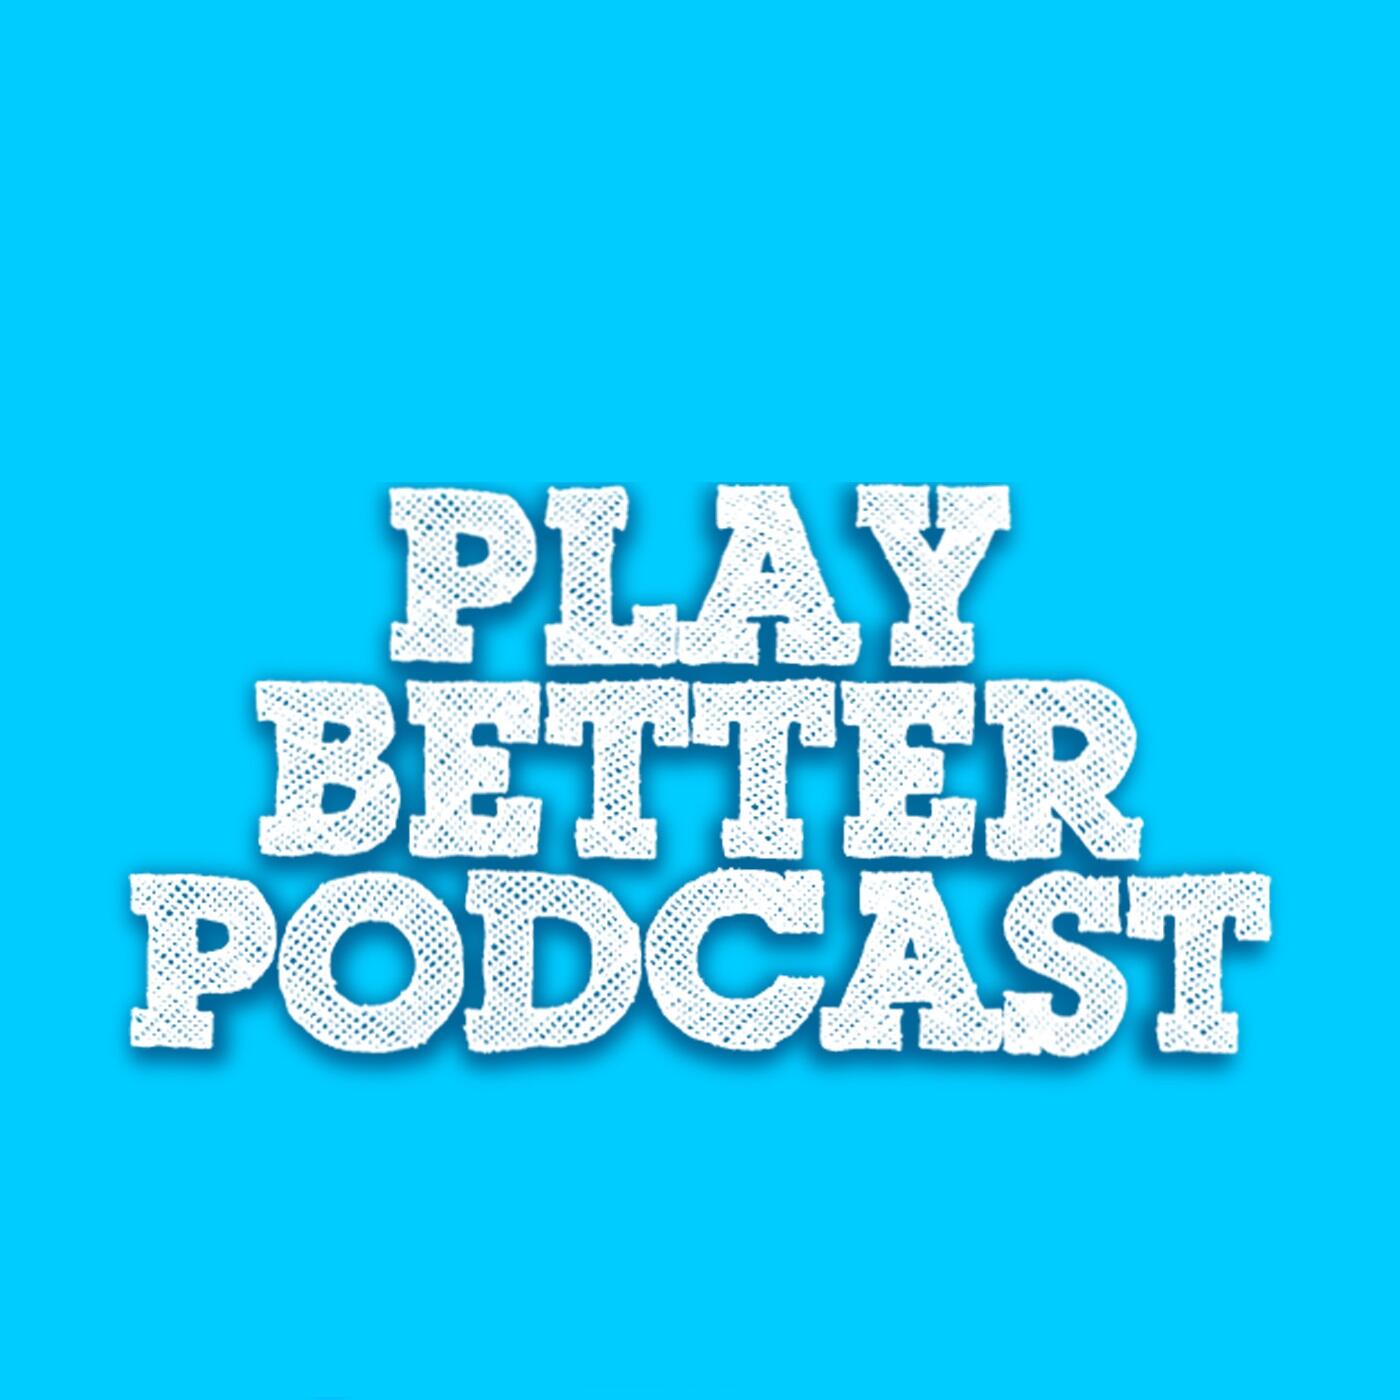 If we play better. Play better Pro. Good Play. Design better Podcast.